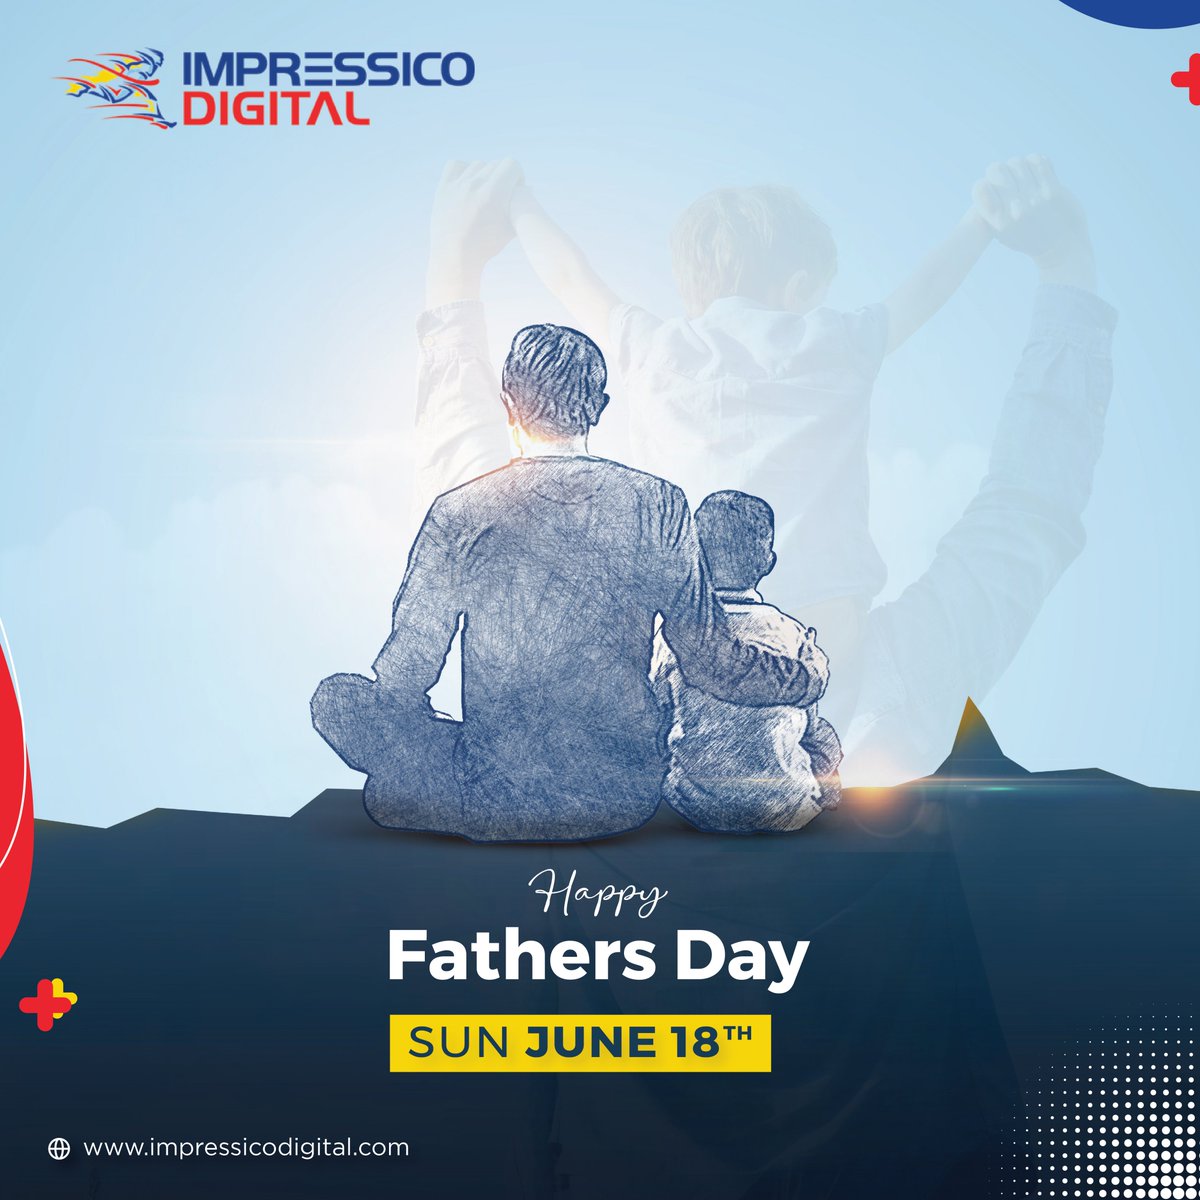 On this special day, we express our gratitude. To all the fathers, we extend our heartfelt praise, for shaping our lives in countless ways.

Happy Father's Day.

#Impressicodigital #FathersDay #FathersDay2023 #HappyFathersDay #ThankYouDad #SuperDad #MyFatherMyHero #FathersDay